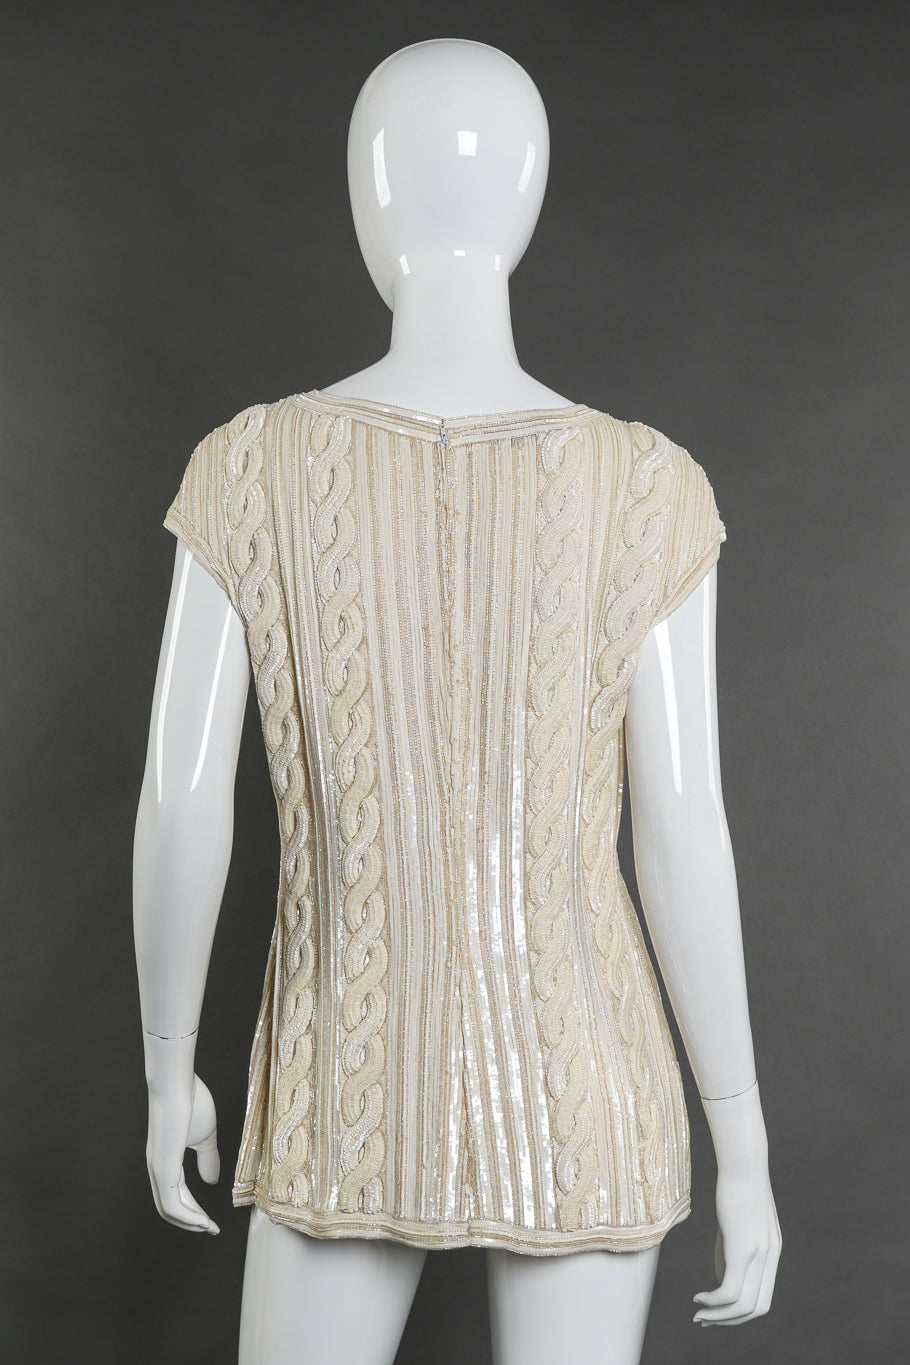 Vintage Valentino Night Cable Knit Sequin Top back on mannequin @recessla